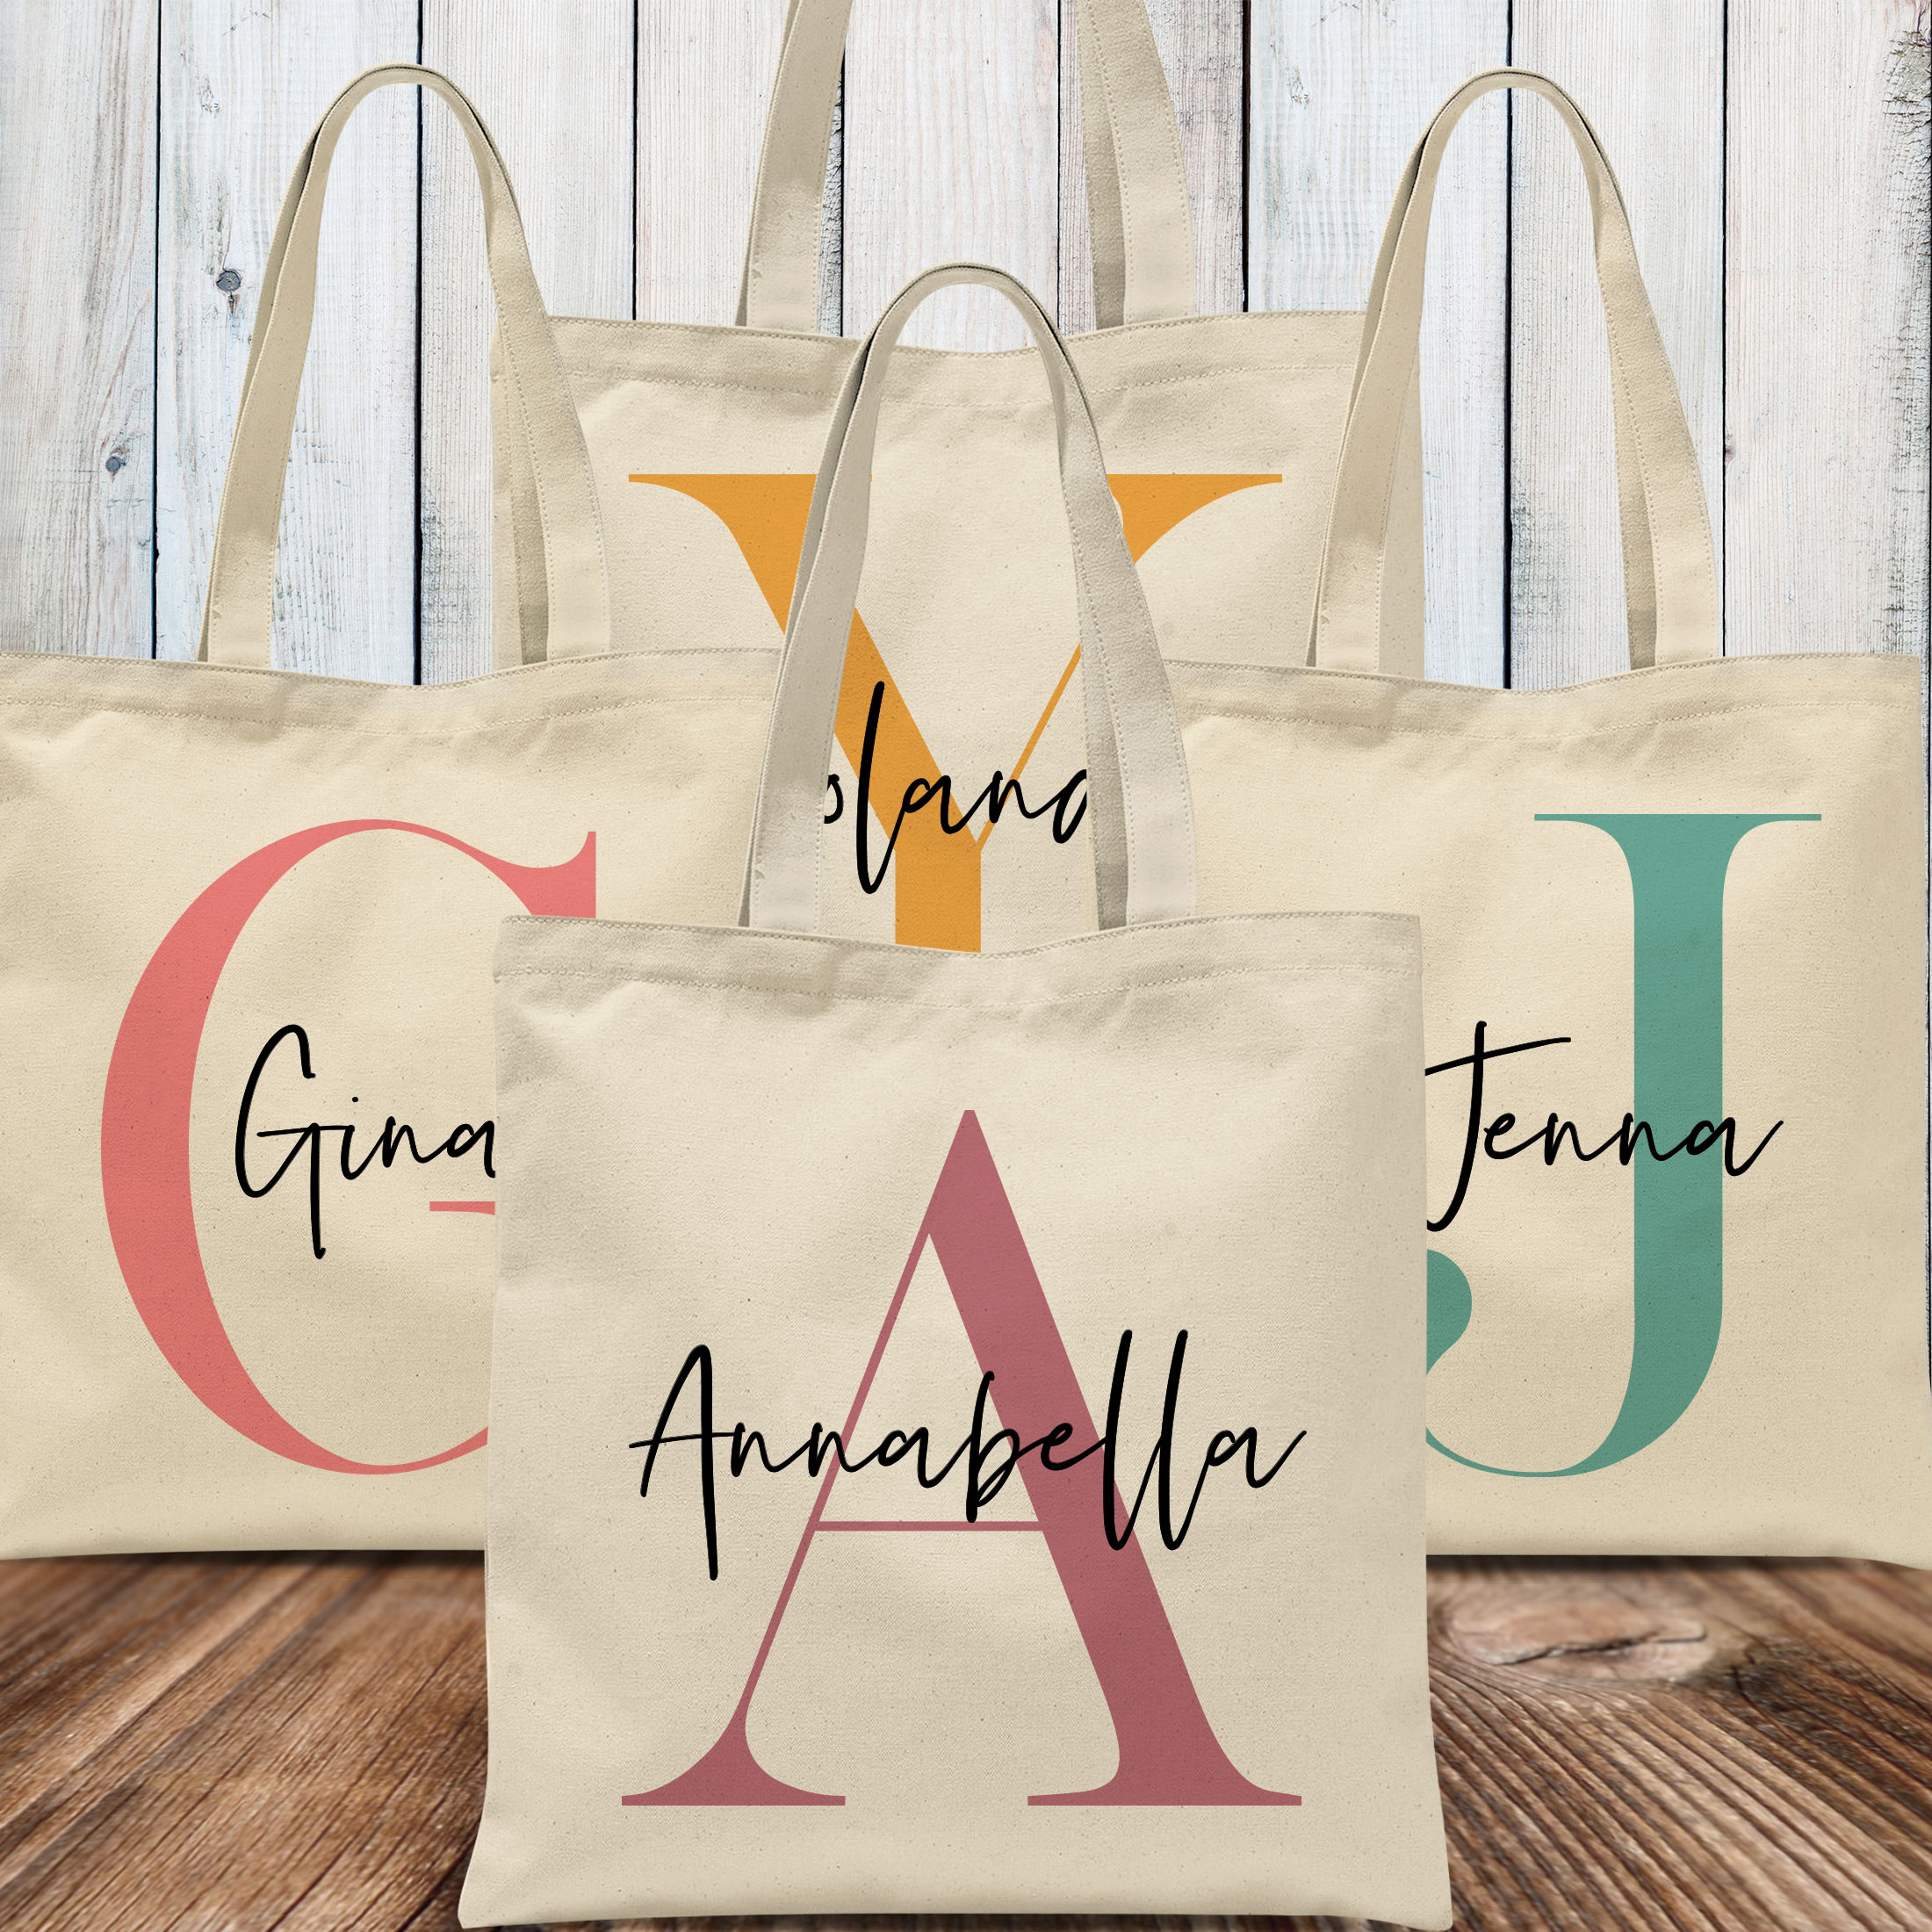 Personalized Initial Canvas Beach Bag Monogrammed Gift Tote Bag for Women